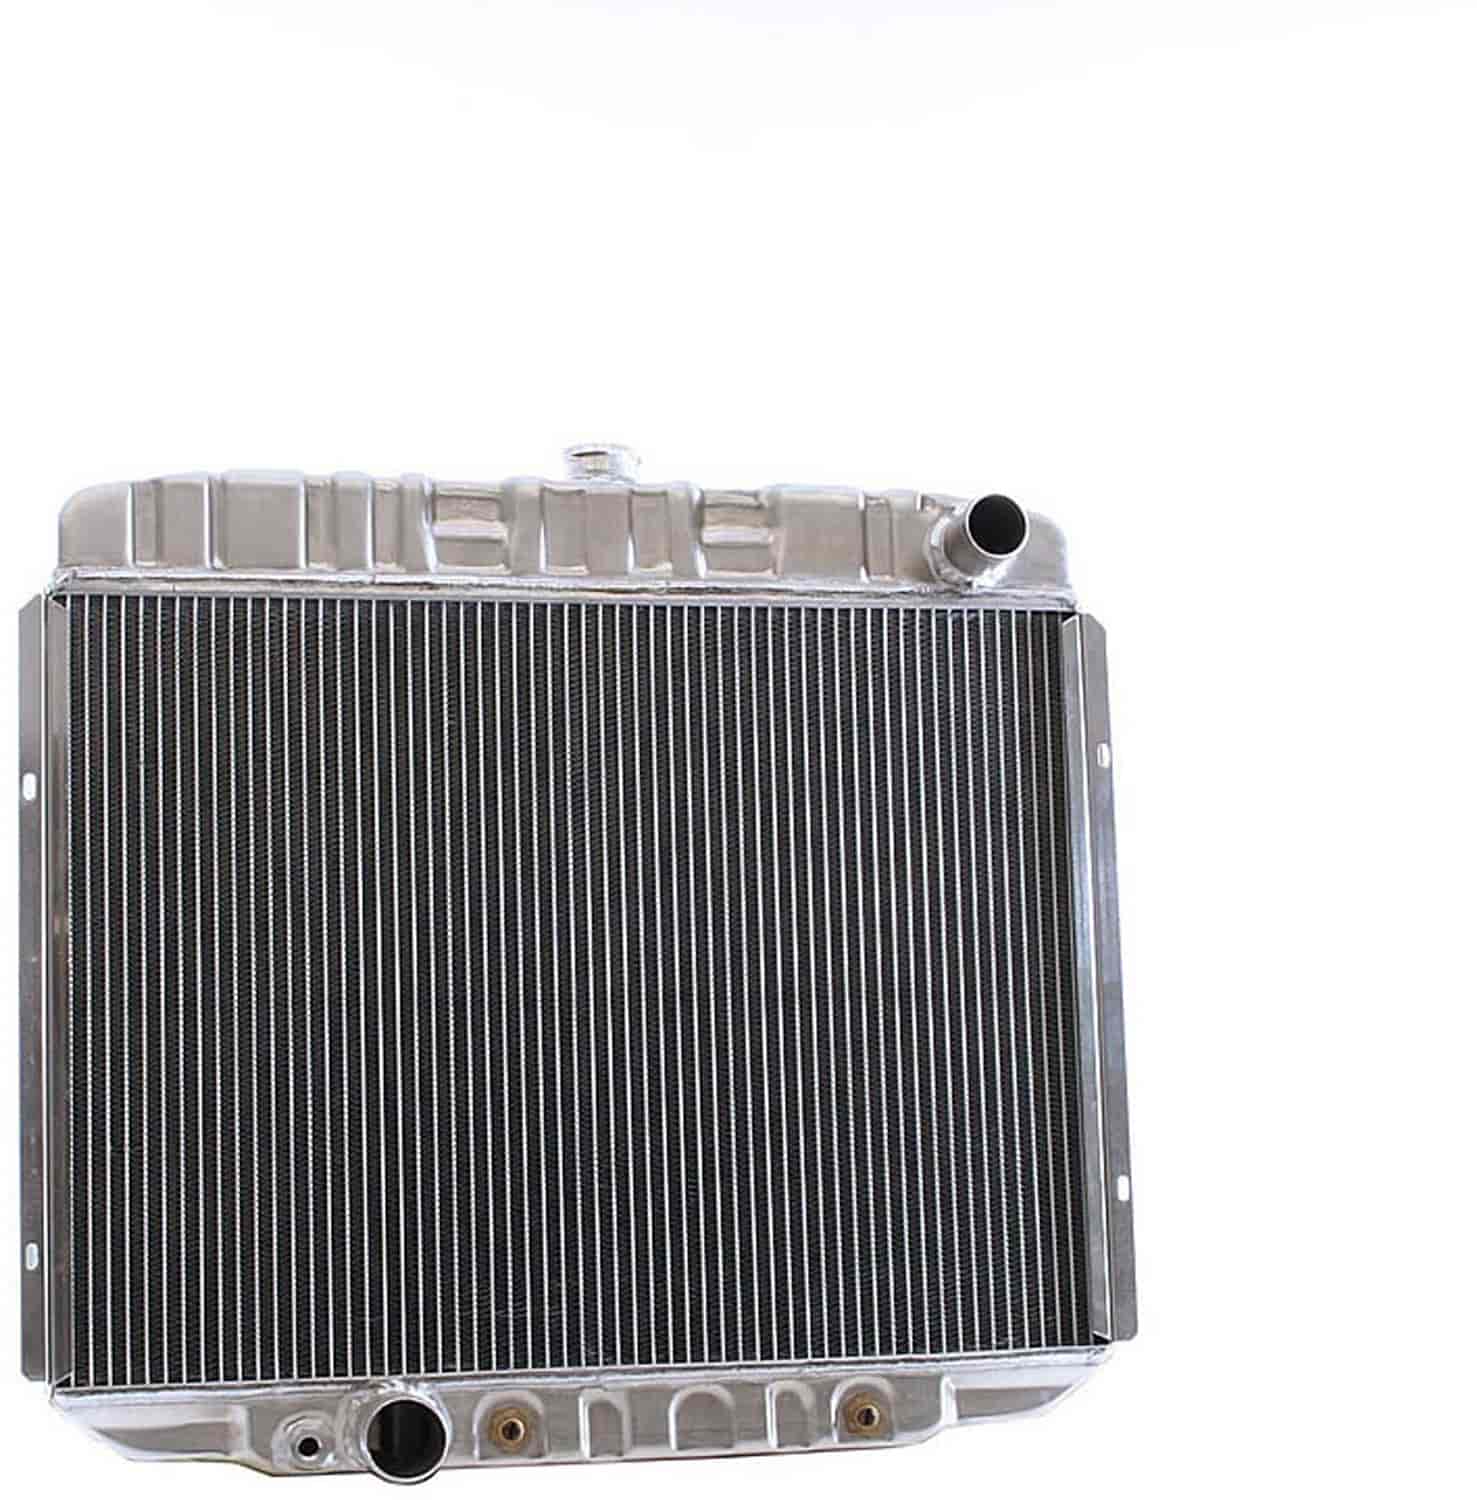 ExactFit Radiator for 1968 Ford Torino with Late Small Block & Big Block